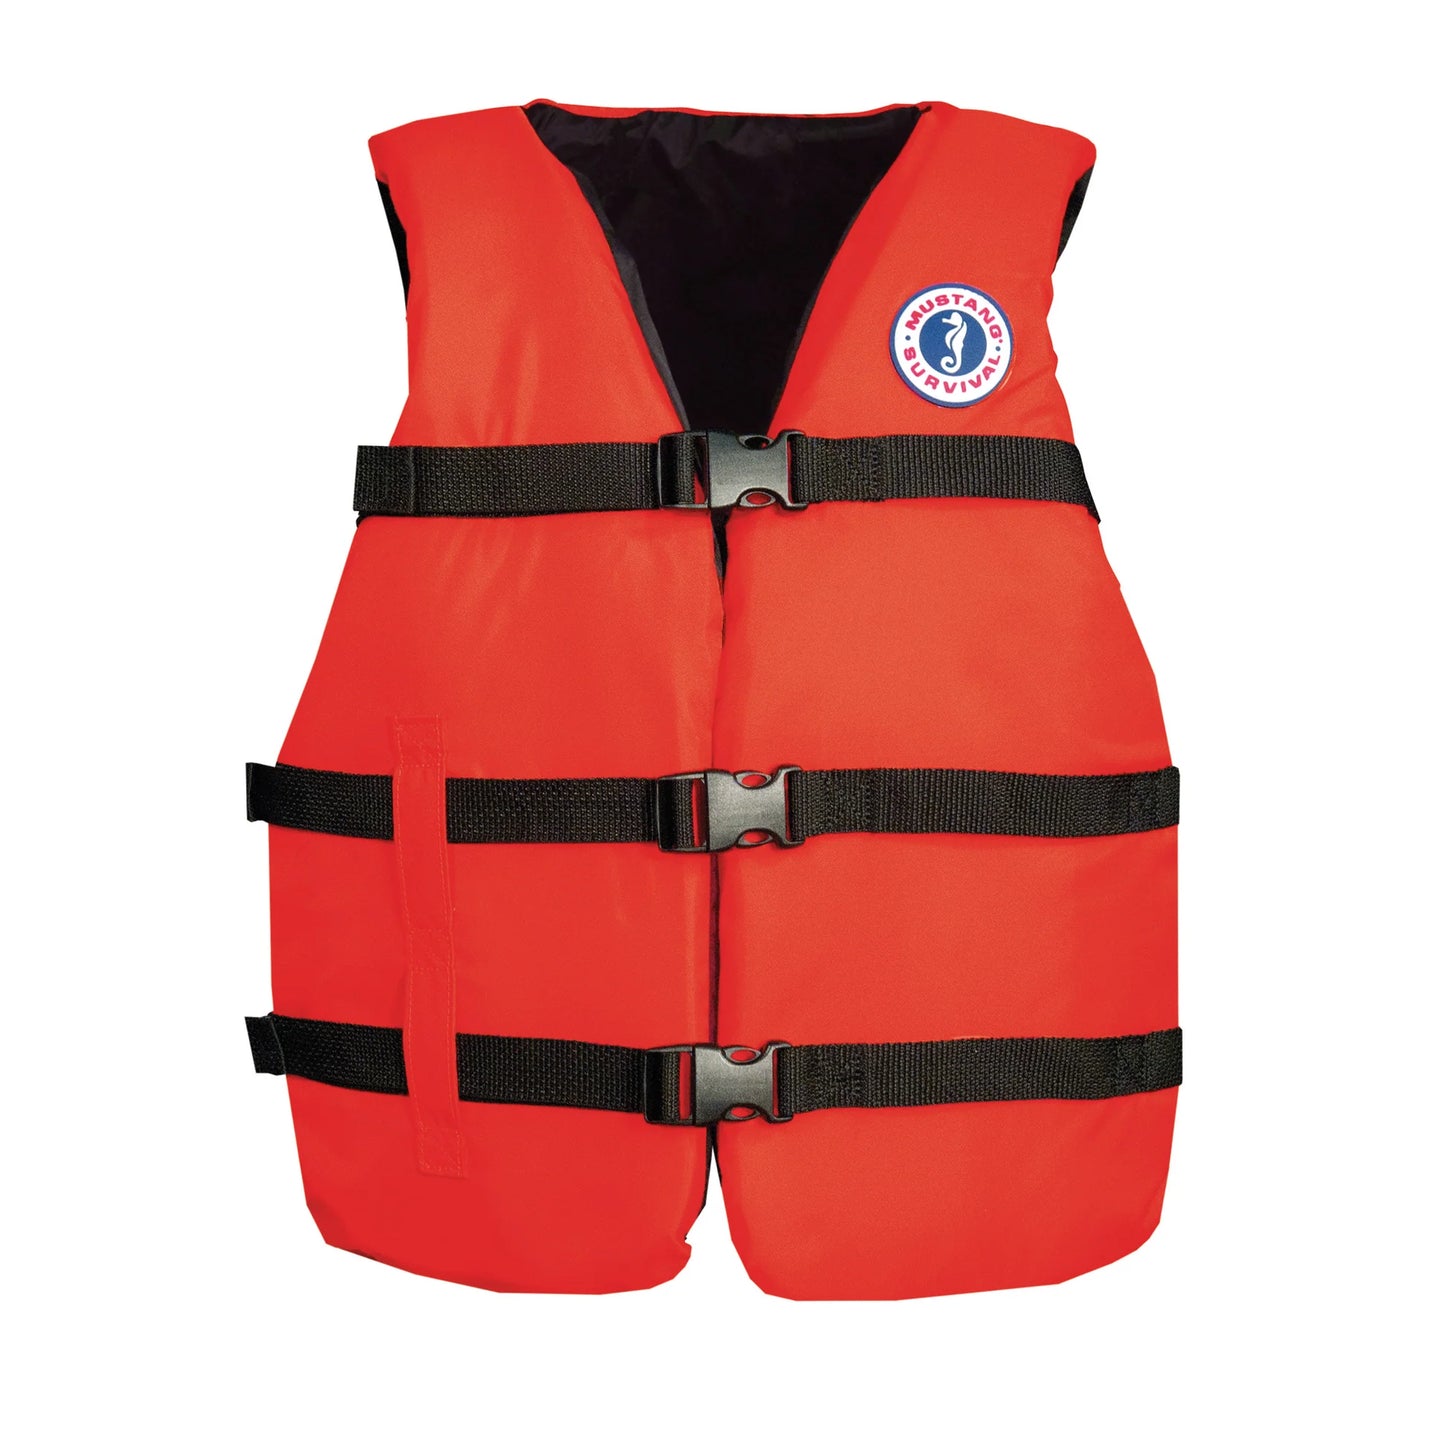 Mustang Survival Adult Universal PFD - One Size